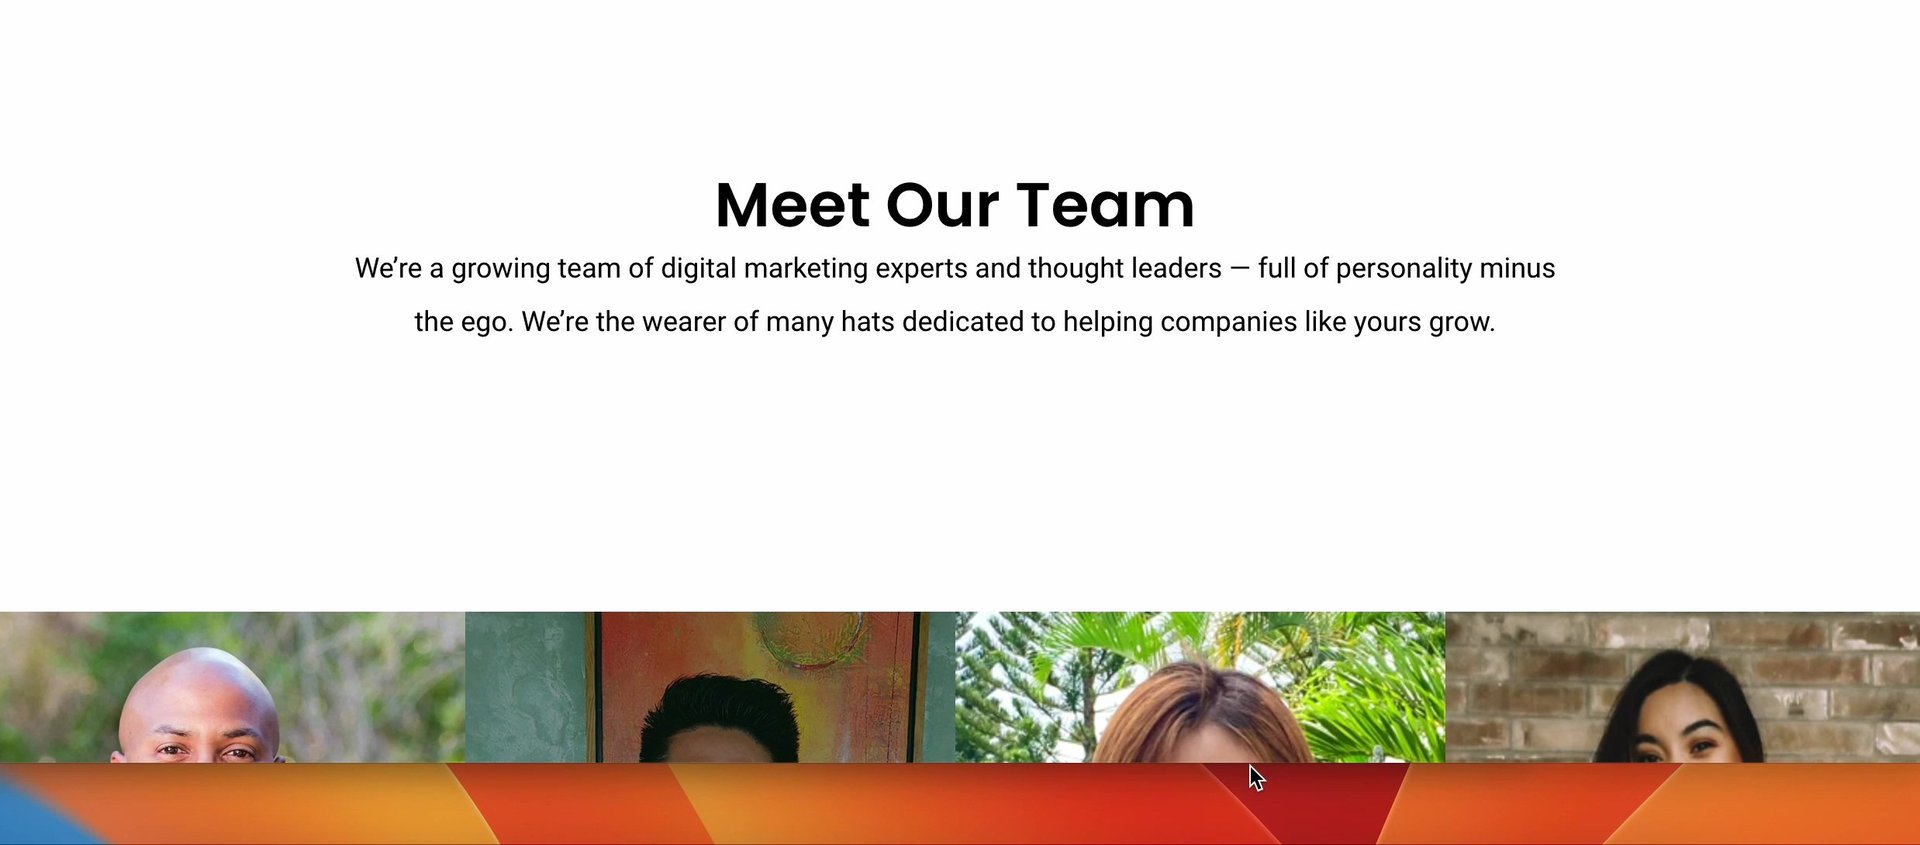 20 Of The Best Meet The Team Page Examples You Need To See (+ Tips)